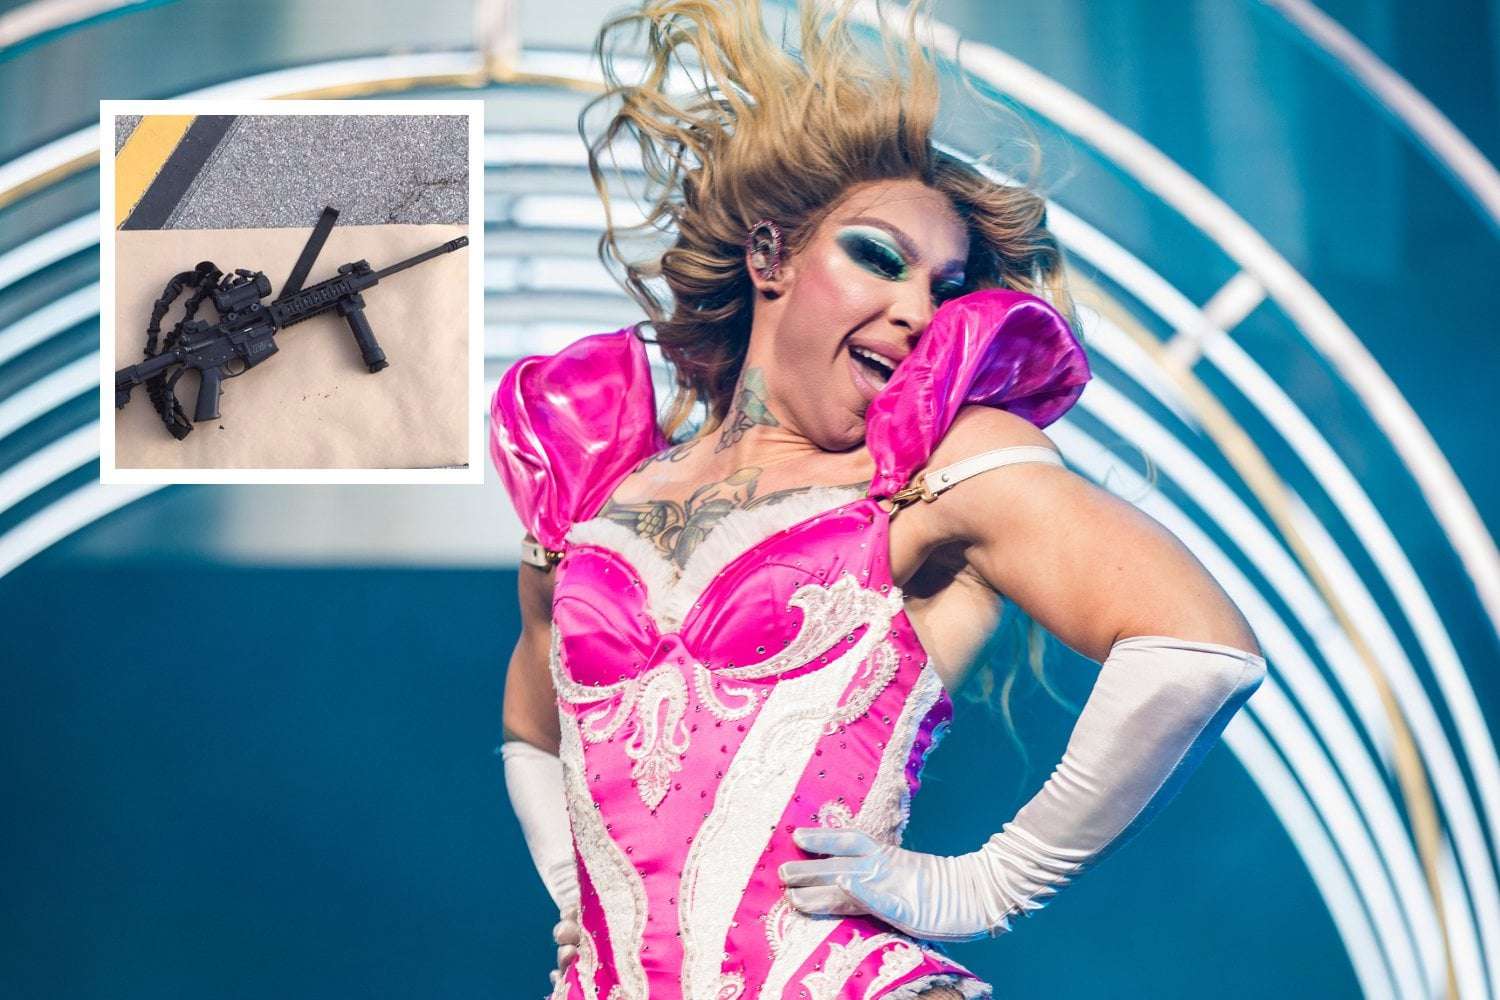 image for Tennessee Republicans' Ban on Drag Shows Criticized After Mass Shooting